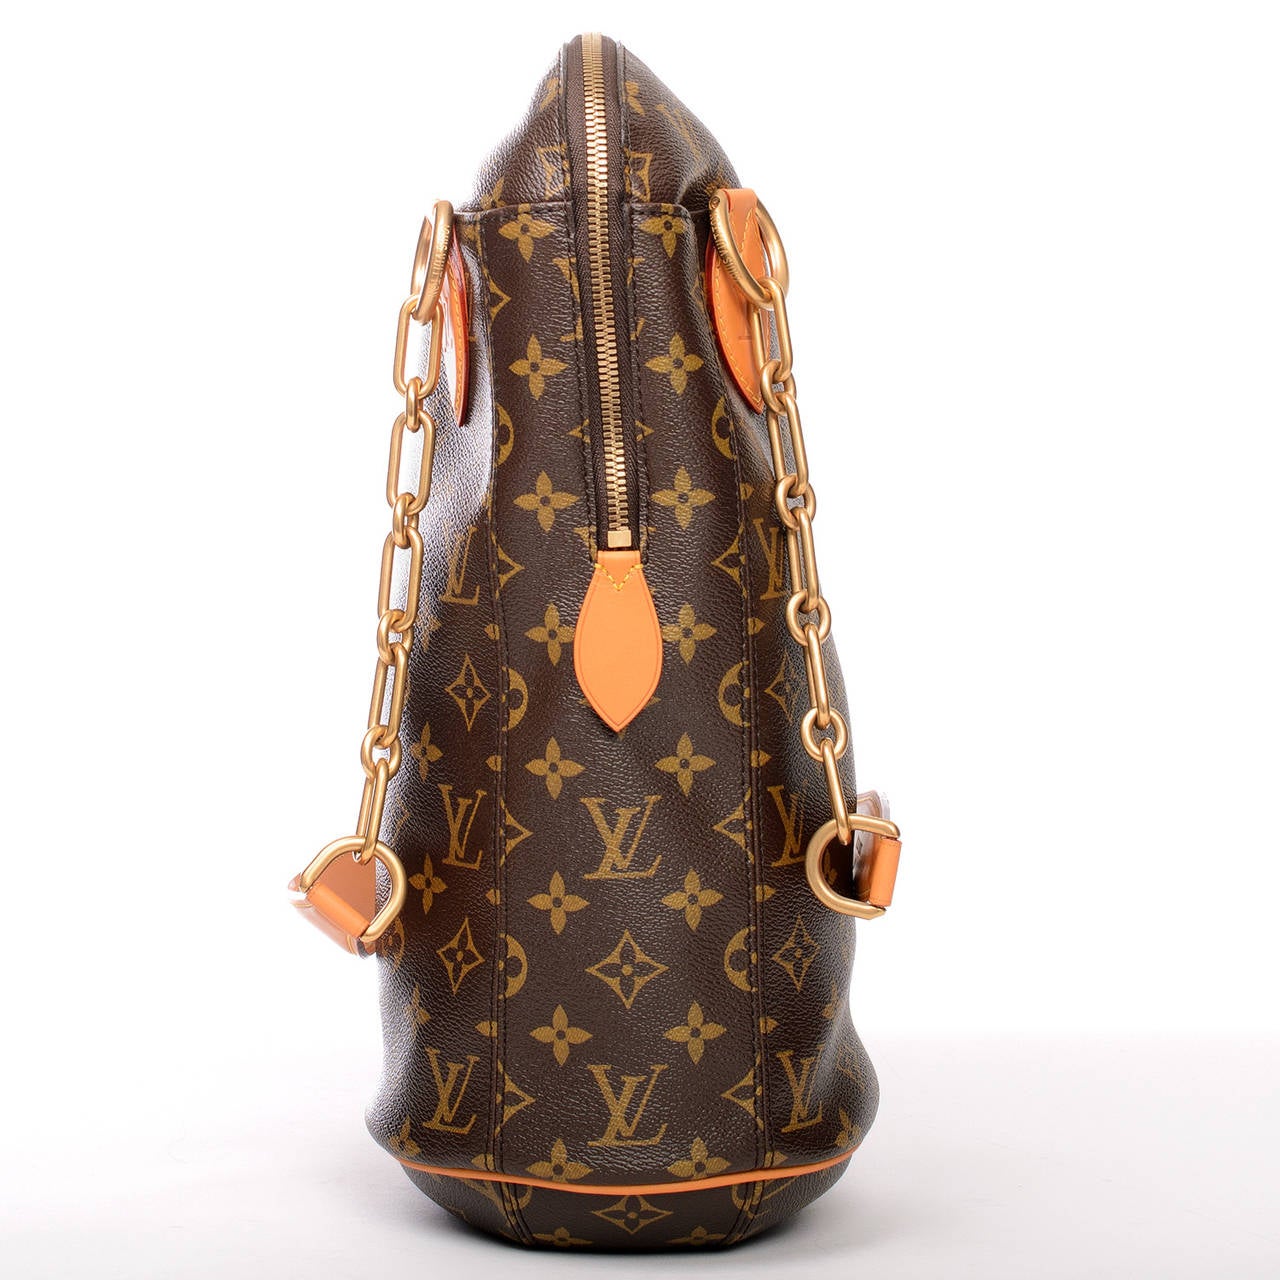 Louis Vuitton Monogram Iconoclasts Punching Bag BB designed by Karl Lagerfeld.

This chic punching bag features coated canvas with tanned vachetta leather trim, aged brass hardware, top zipper closure, and double chain link straps with leather